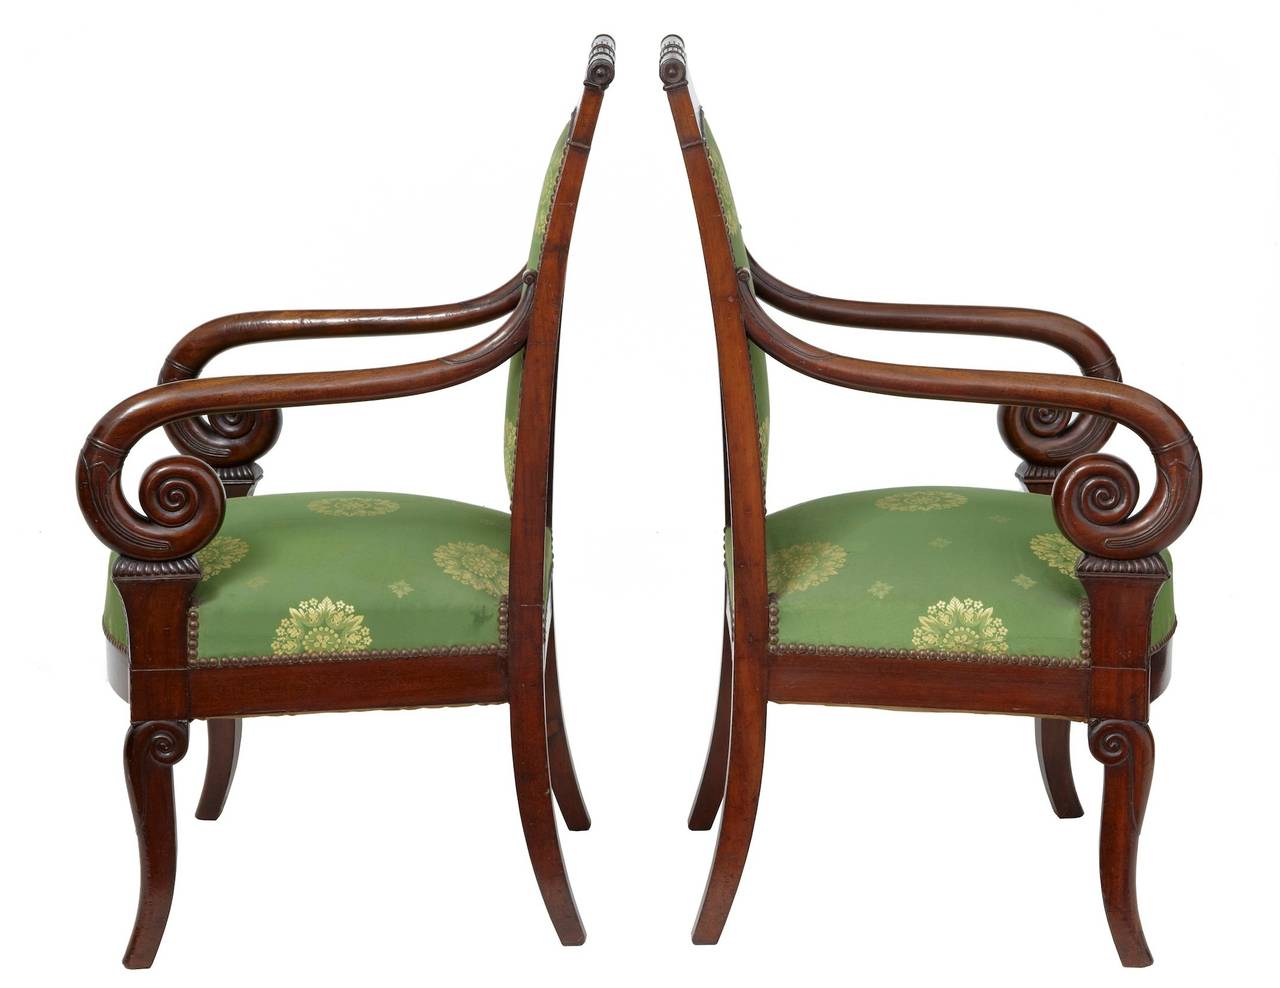 Superb pair of French empire armchairs circa 1830. 

Carved details on the back and scrolled arms. Upholstery in good order.